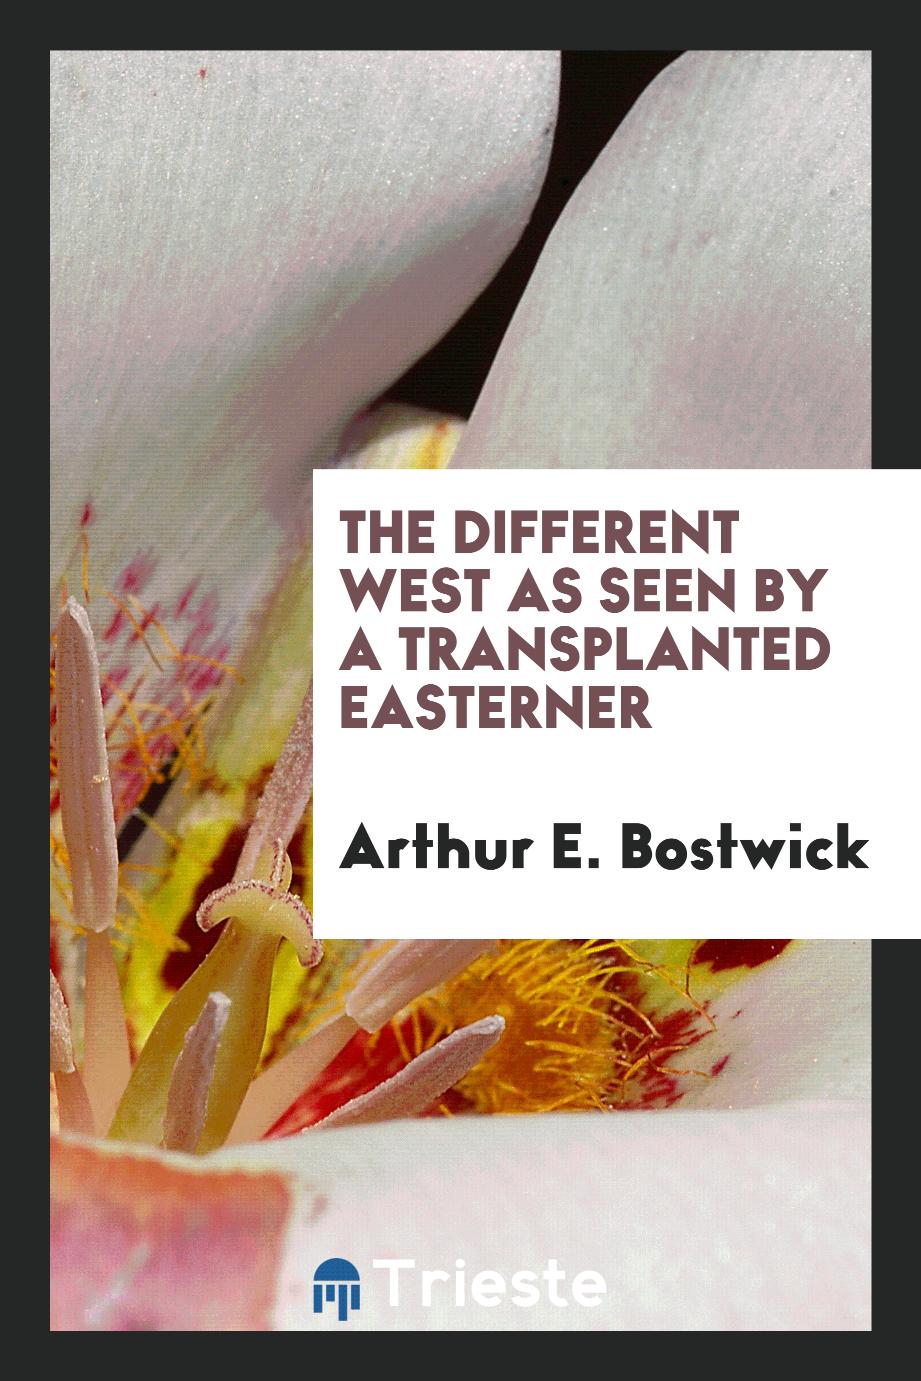 Arthur E. Bostwick - The different West as seen by a transplanted easterner